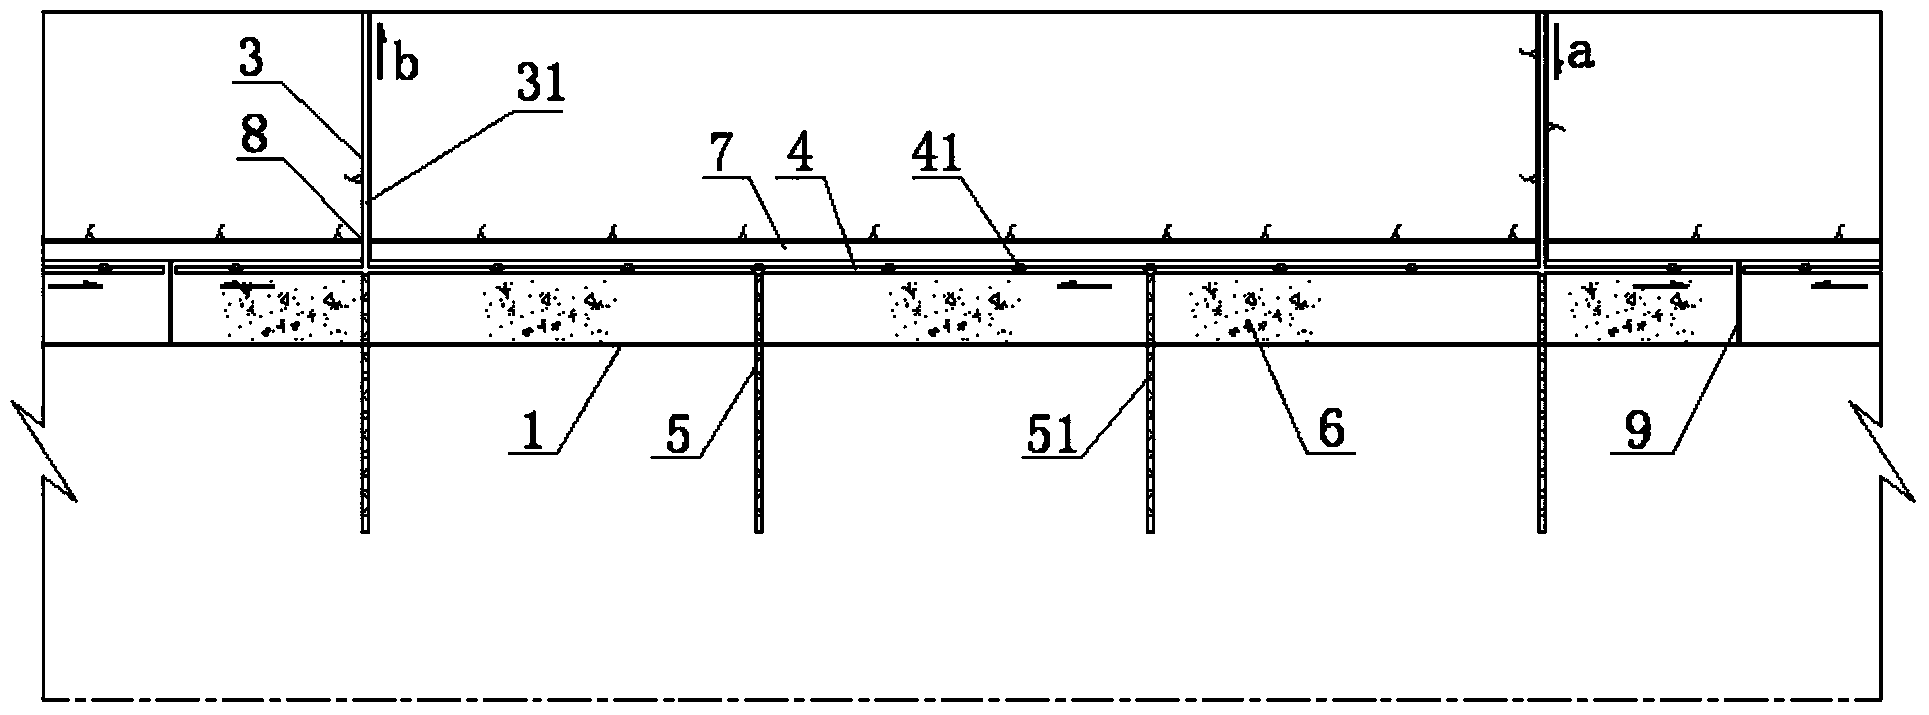 Embedded type penstock backfill grouting structure and grouting technology